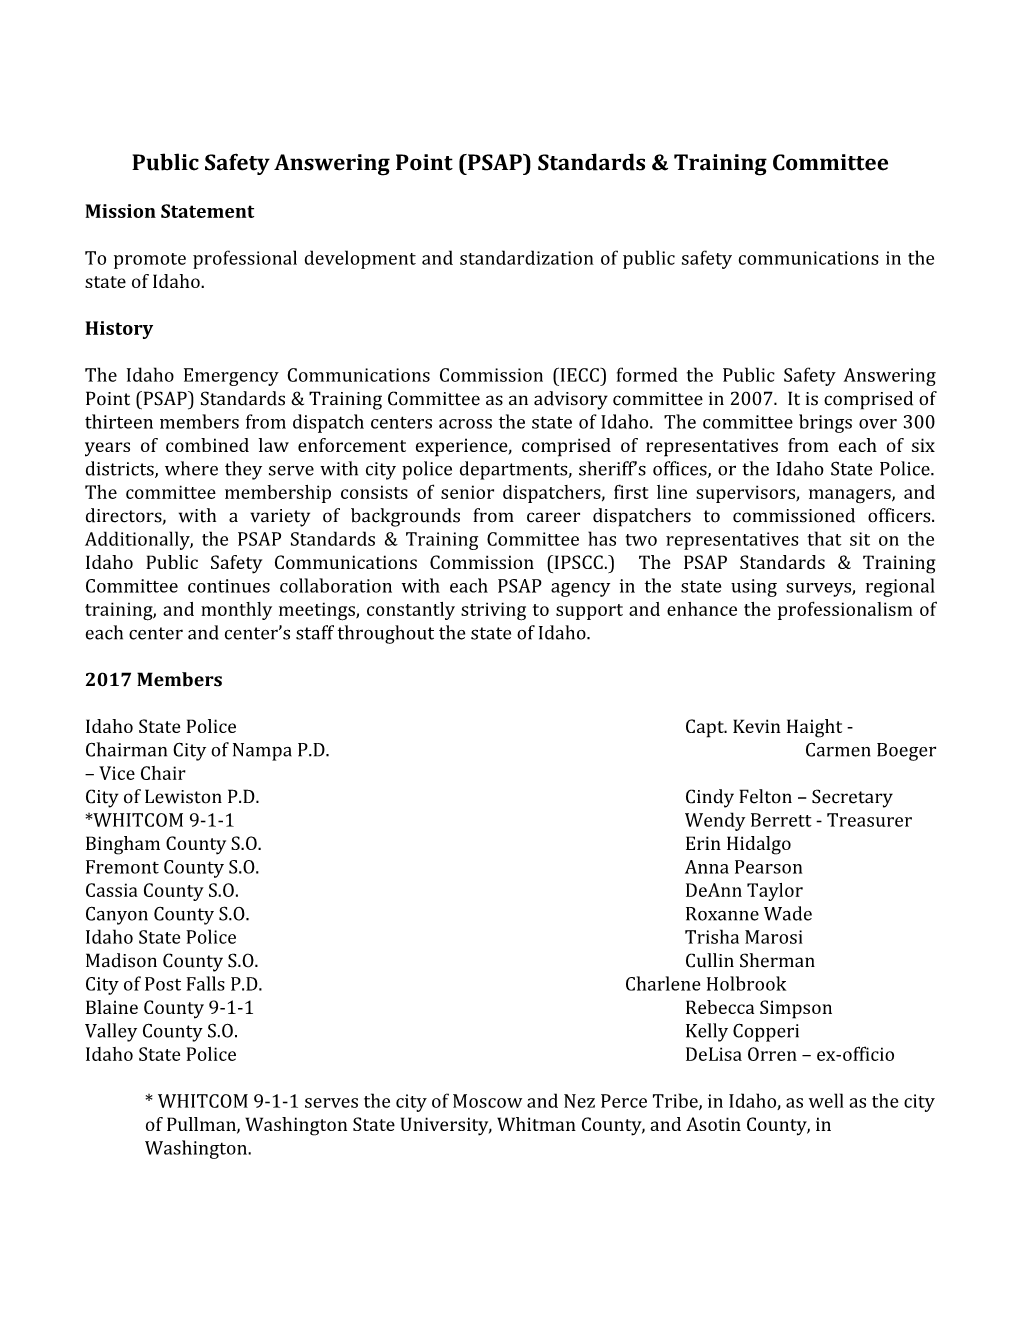 Public Safety Answering Point (PSAP) Standardstraining Committee